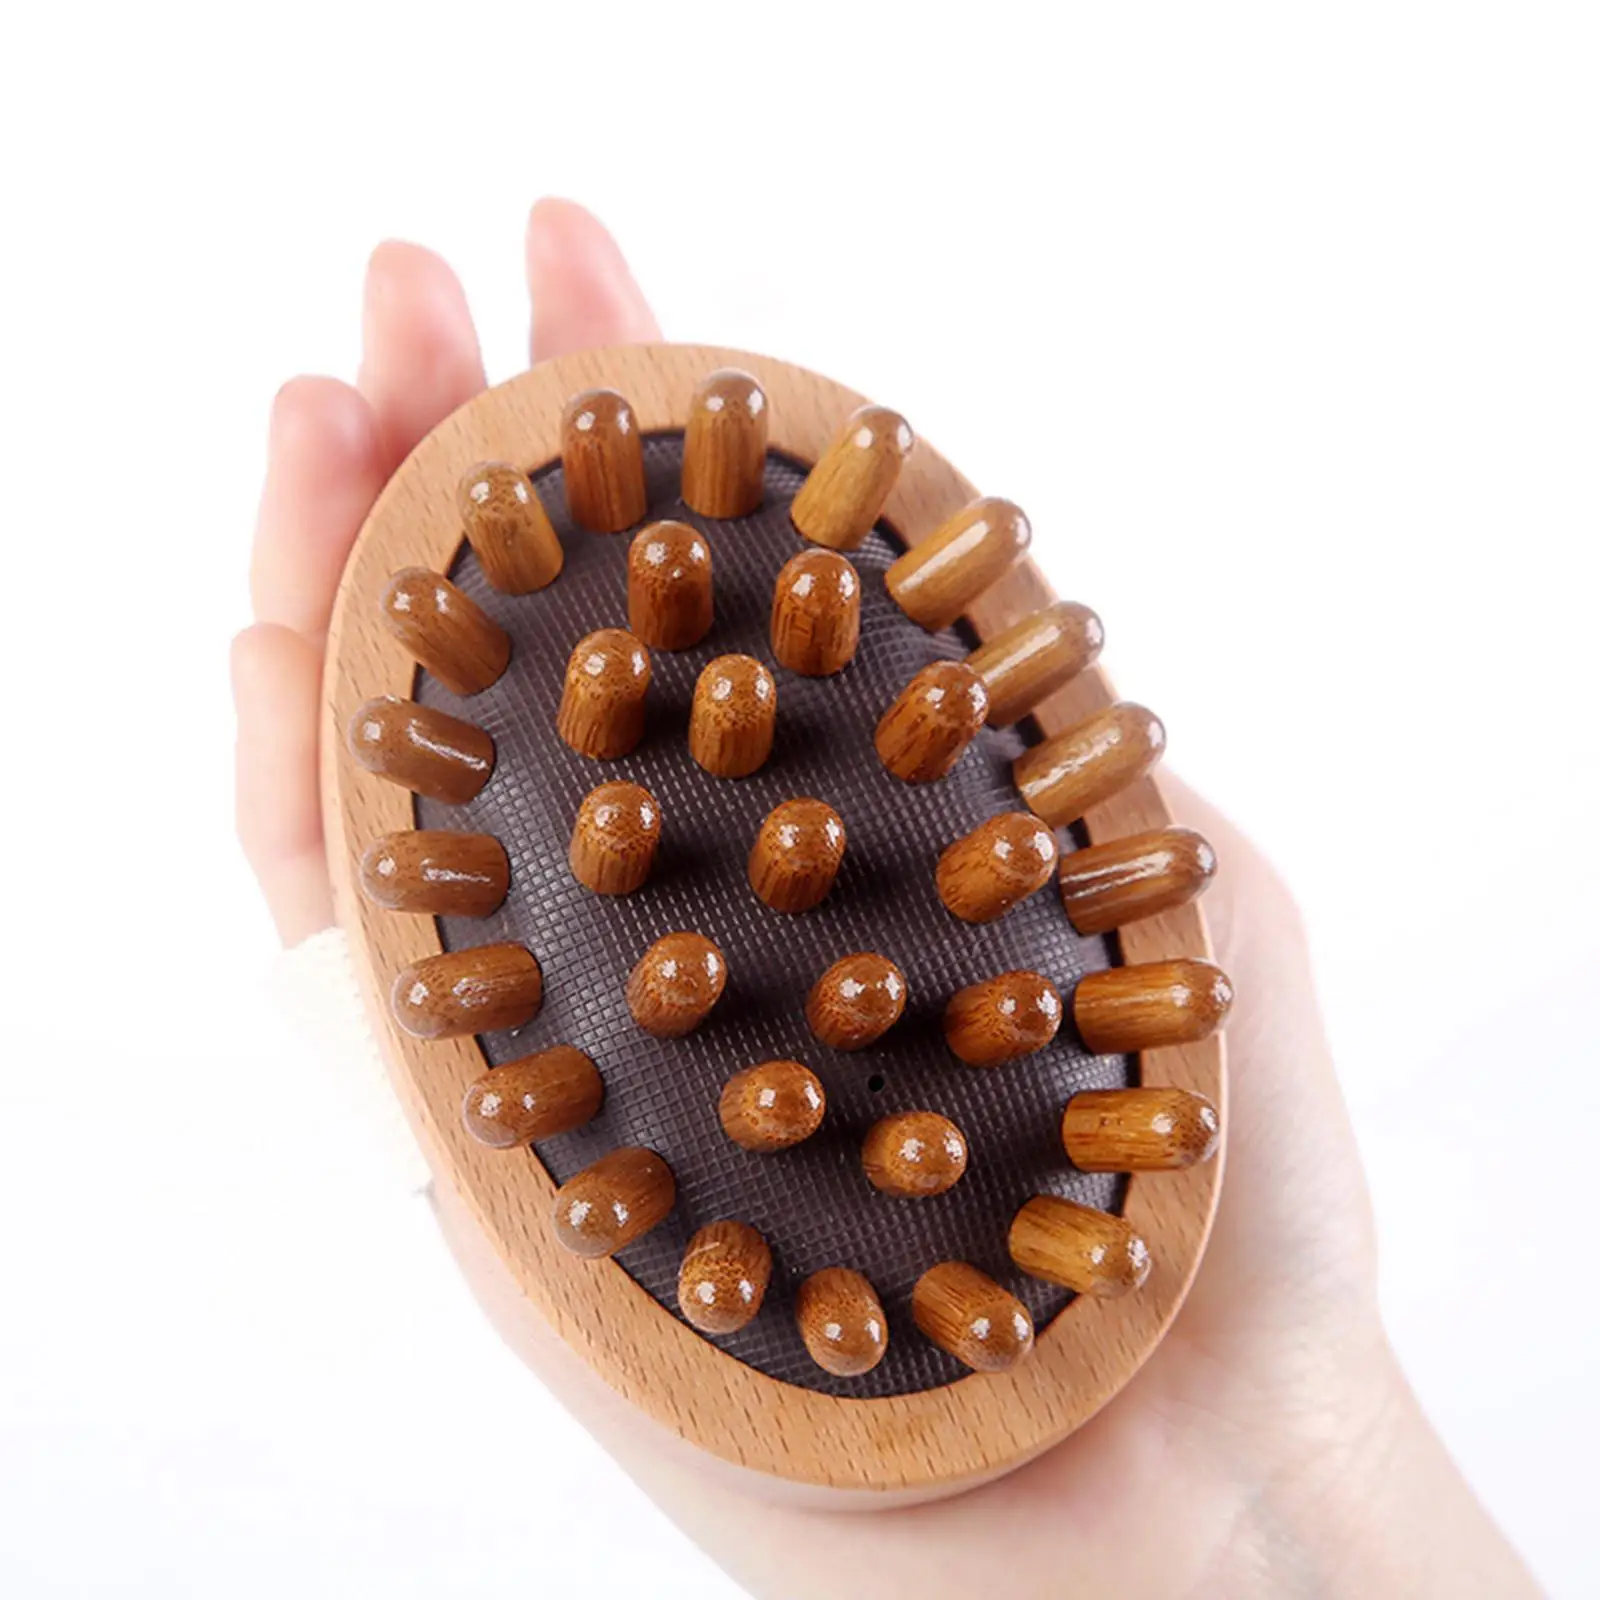 Wooden Massage Body Brush Tool Body Sculpting Tool Muscle Relaxation Handheld Wood Massage Tools for Back Neck Thigh Waist Legs